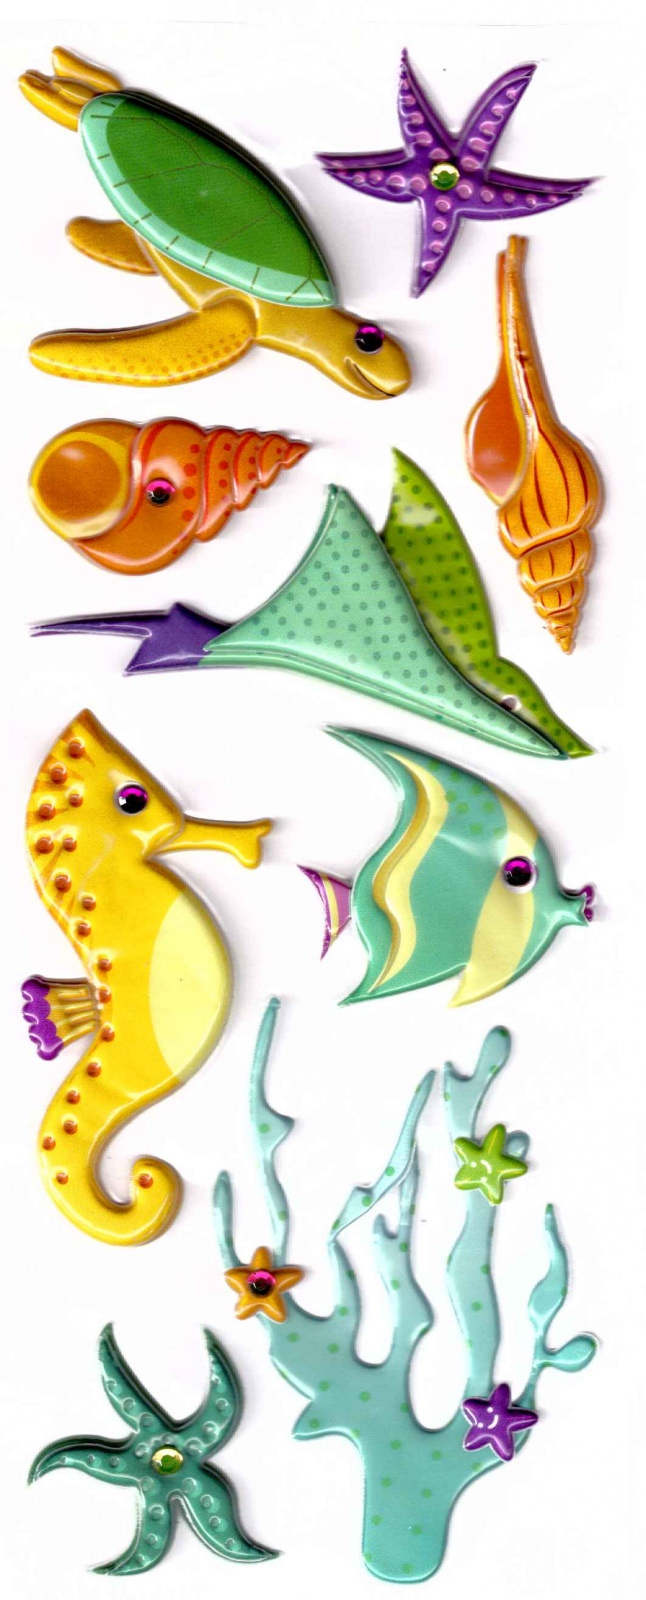 Stickers Scrapbooking Hippocampes M series